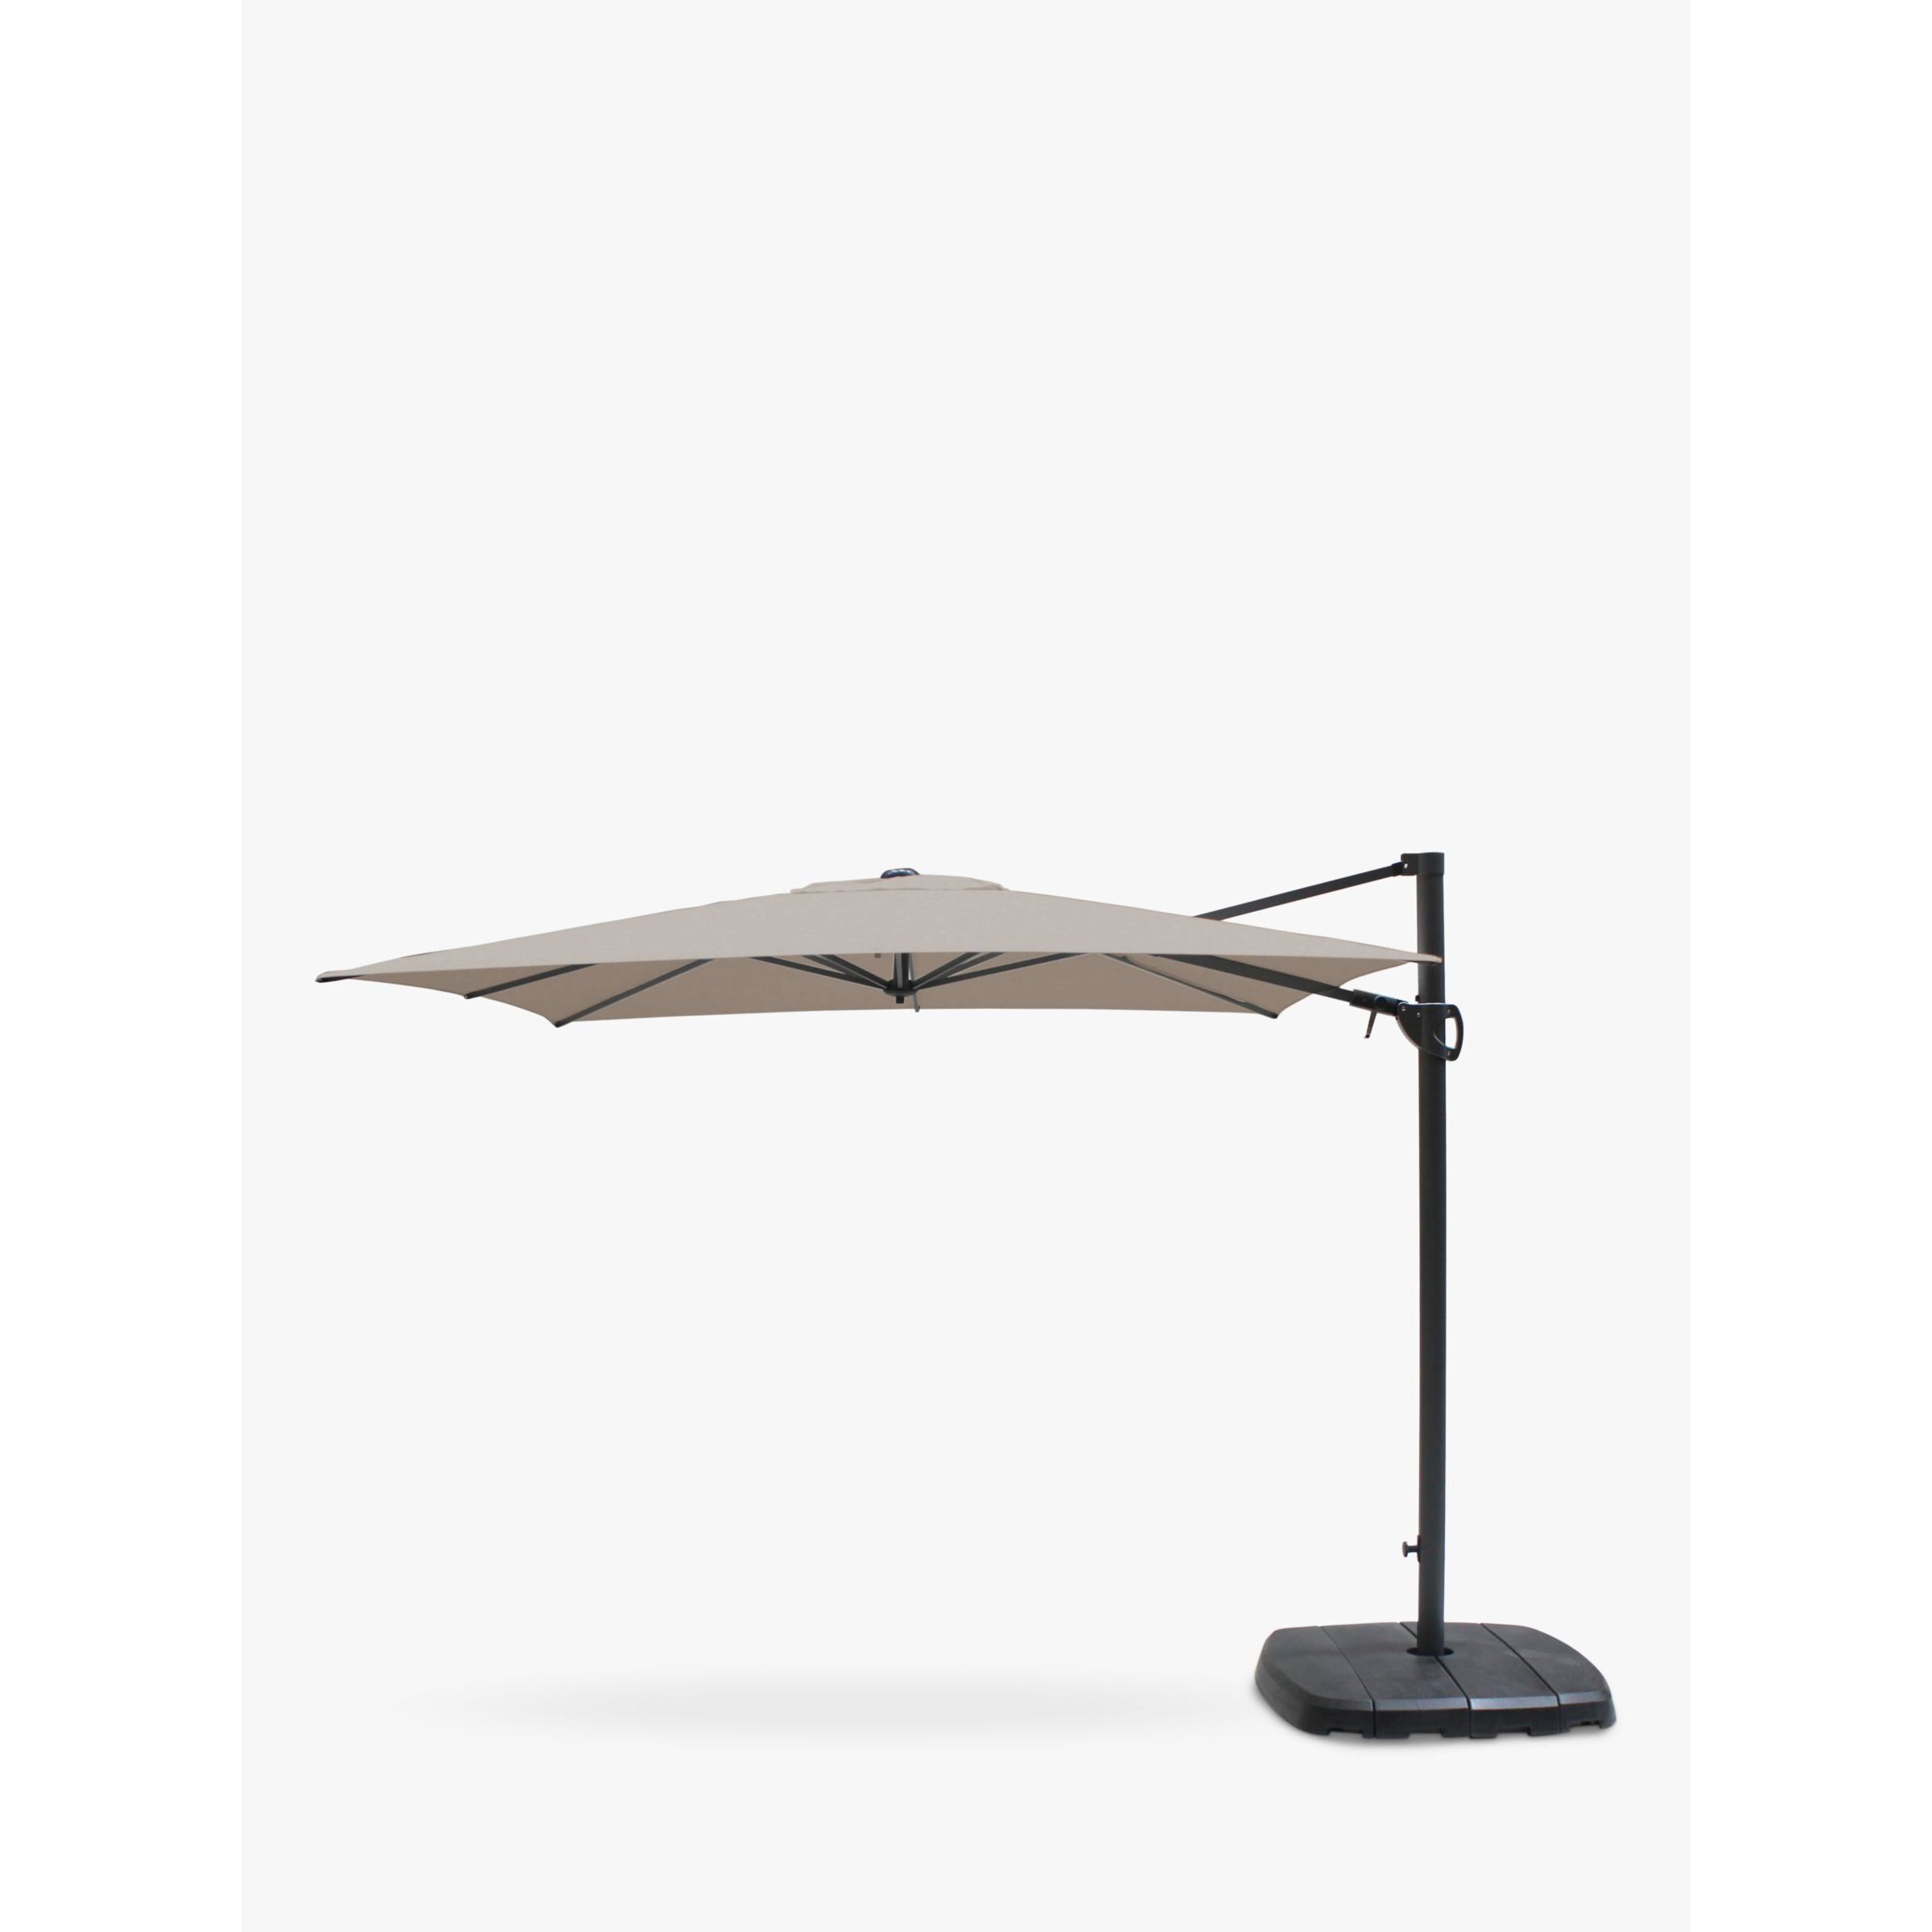 KETTLER Free Arm Square Garden Parasol with Base, 2.5m - image 1